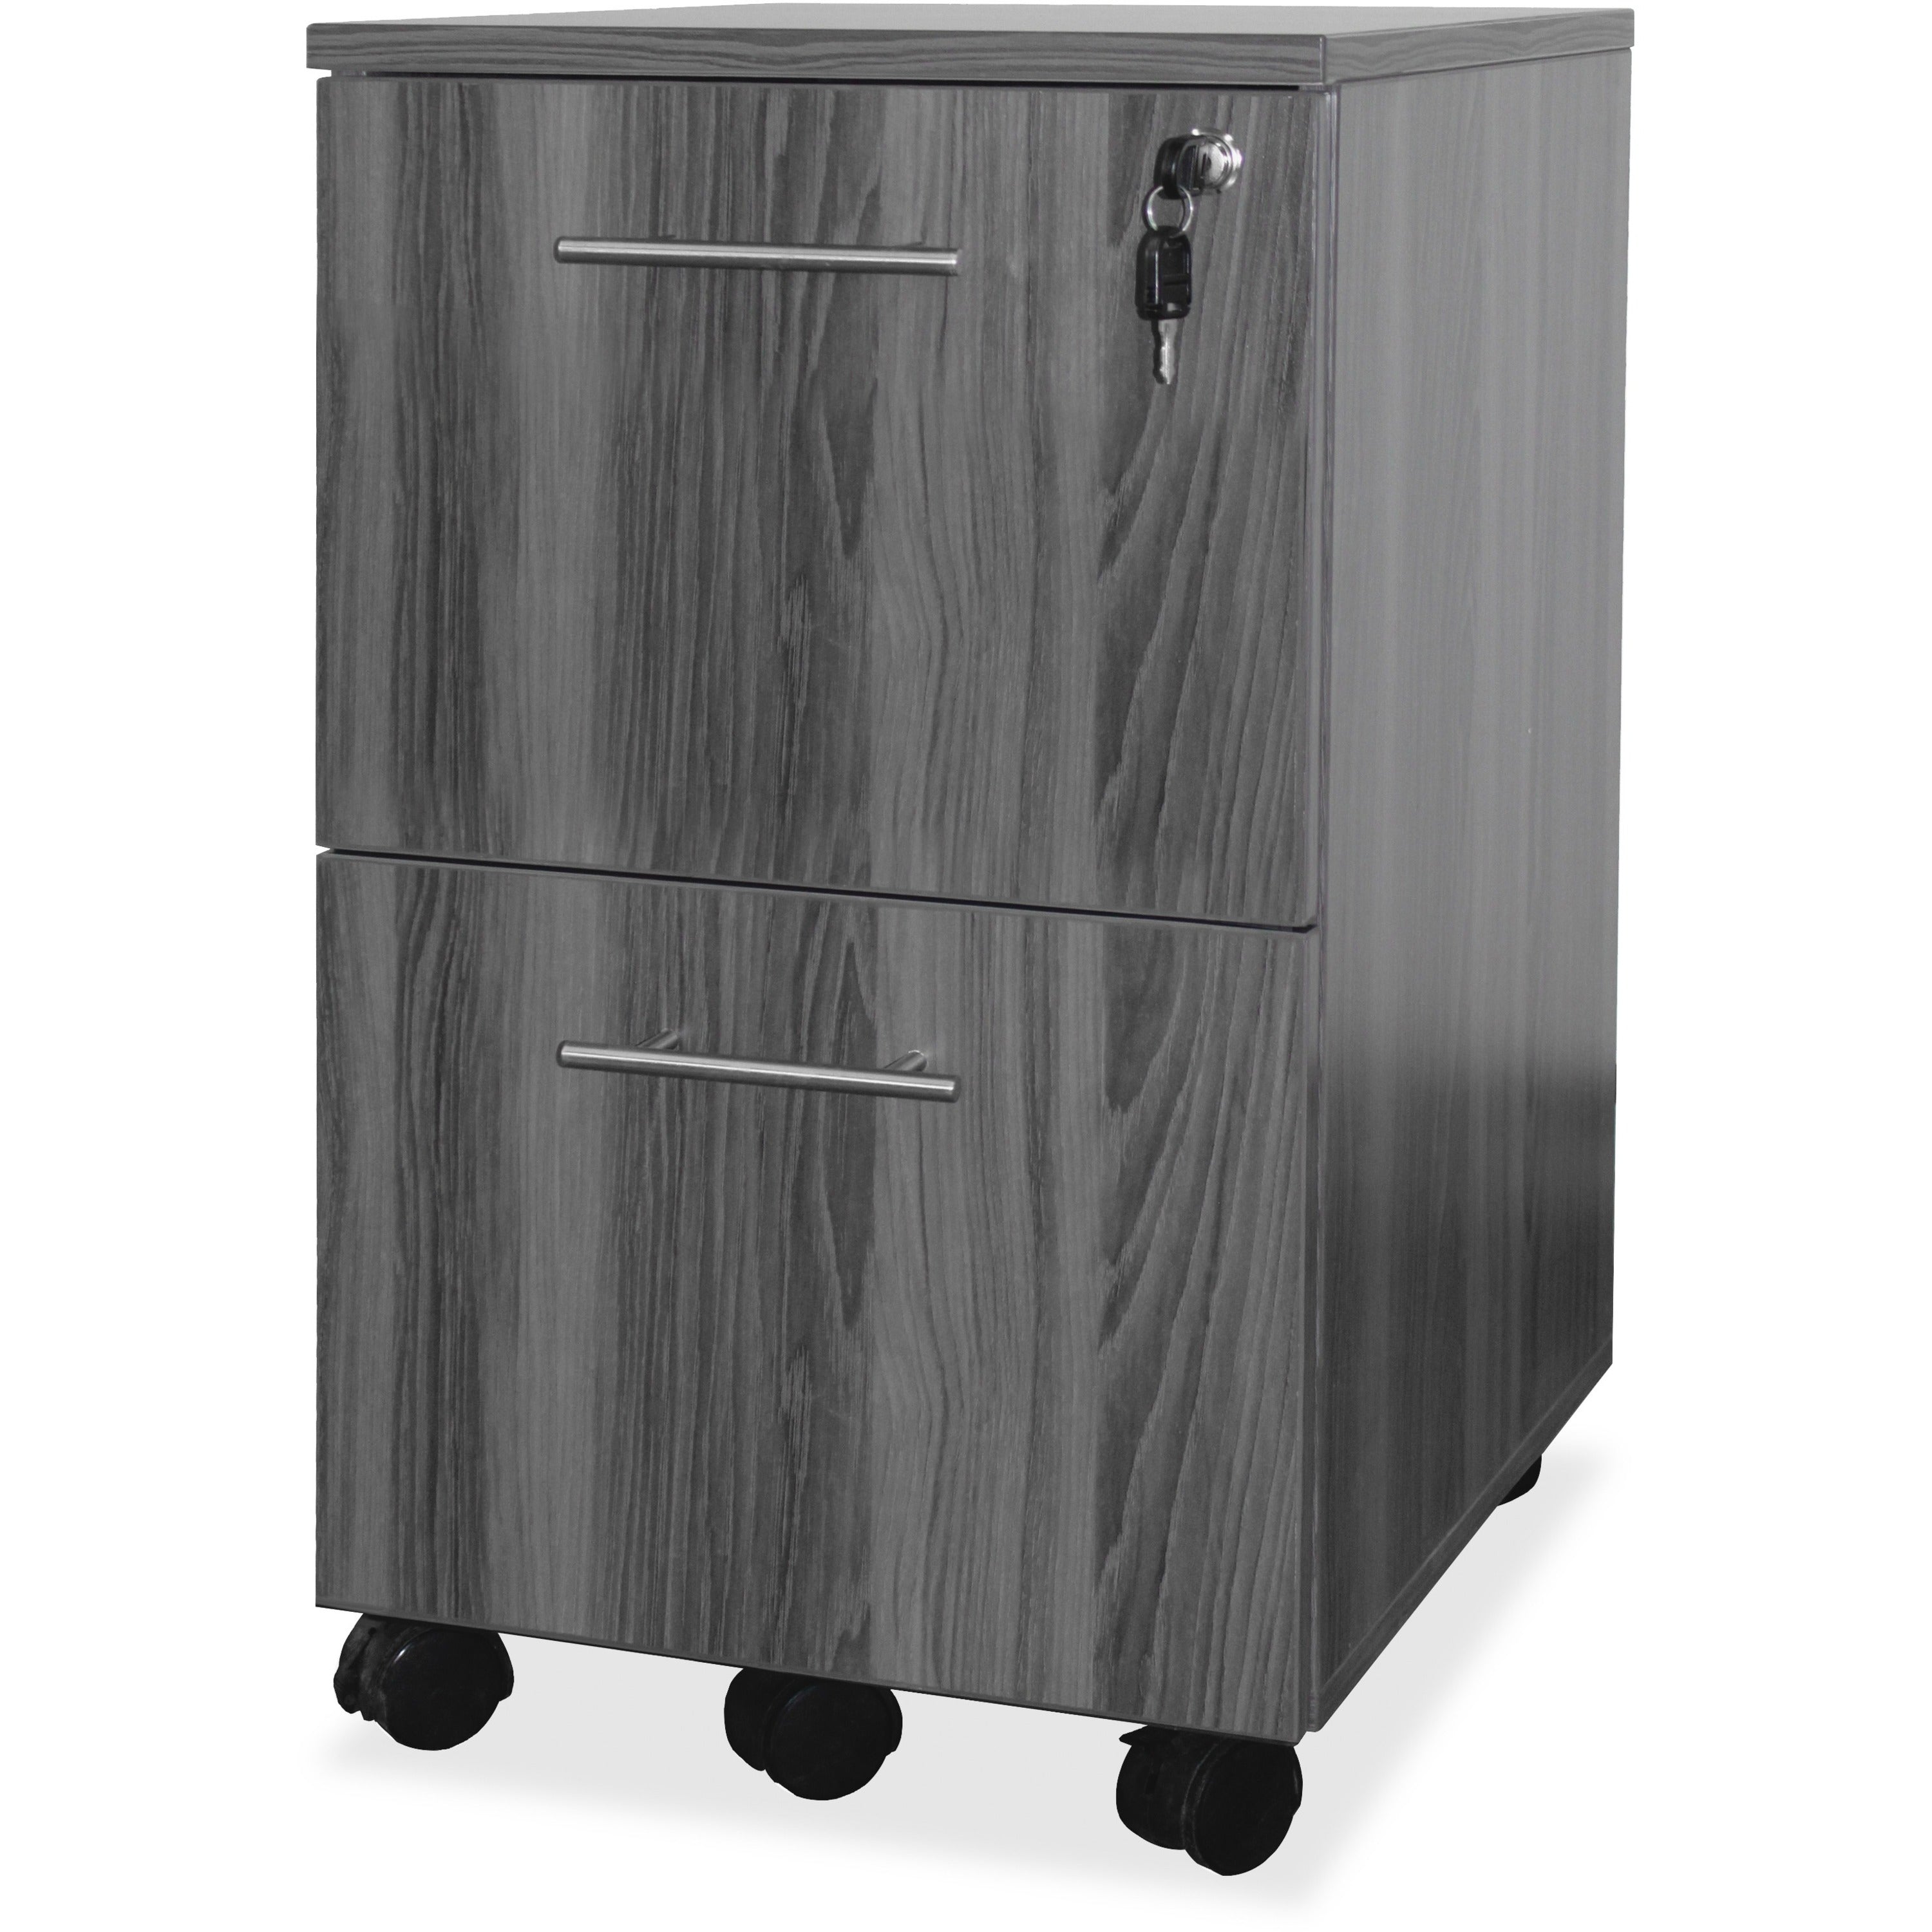 Mayline Gray Laminate File/File Mobile Pedestal File - 18" x 15.5" x 26.8" - 2 x File Drawer(s) - Material: Steel - Finish: Gray, Laminate - Stain Resistant, Water Resistant, Abrasion Resistant, Drawer Extension, Ball-bearing Suspension, Built-in Han - 